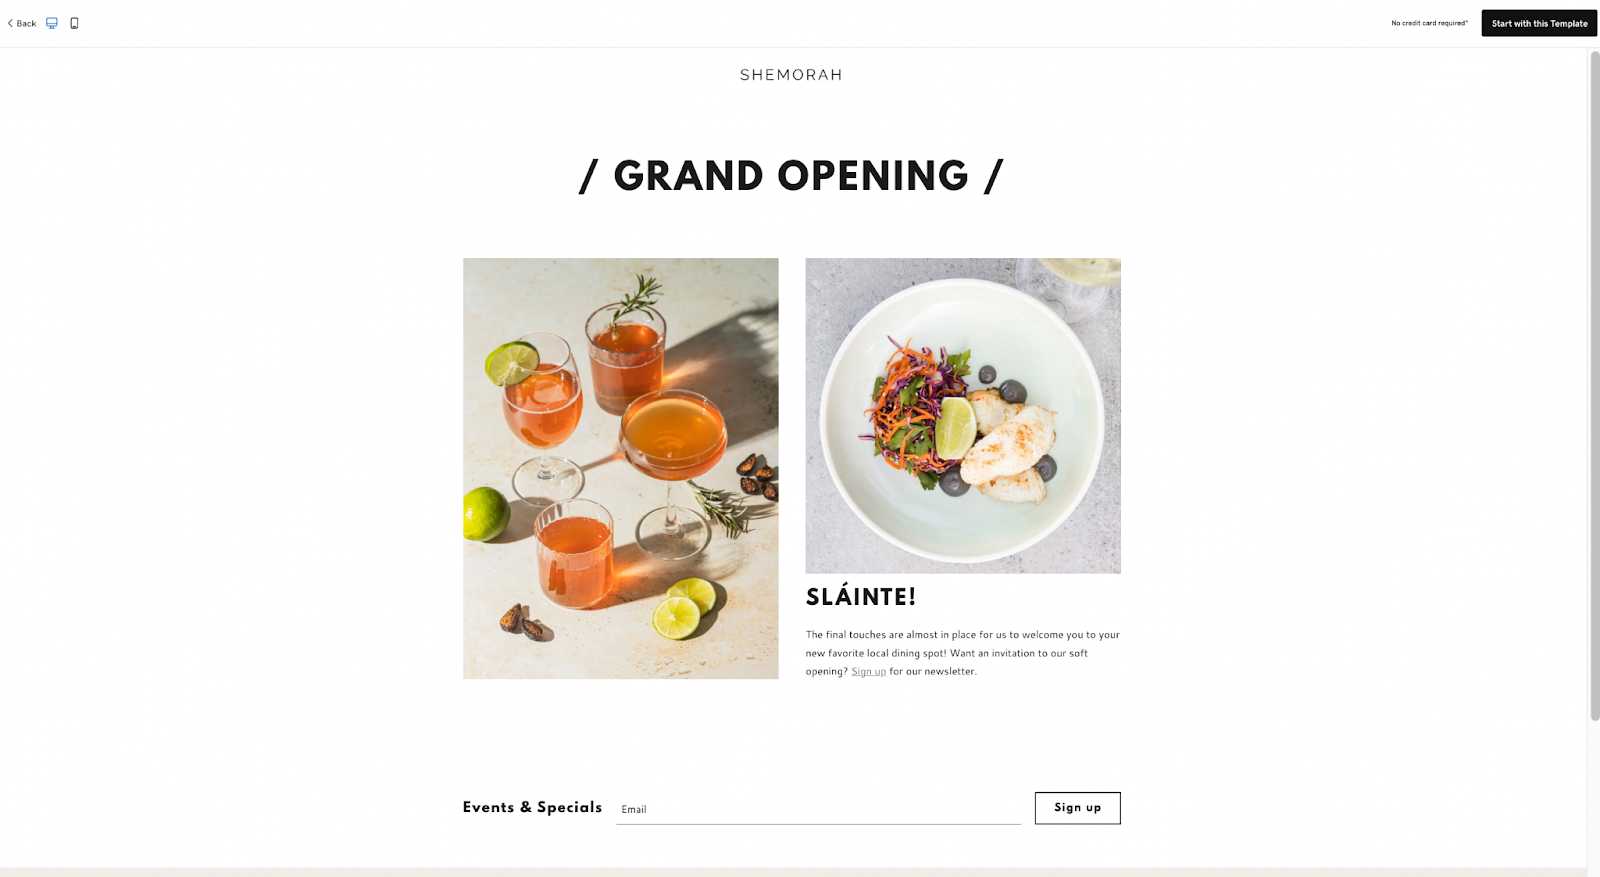 Website template for a restaurant grand opening by GoDaddy.